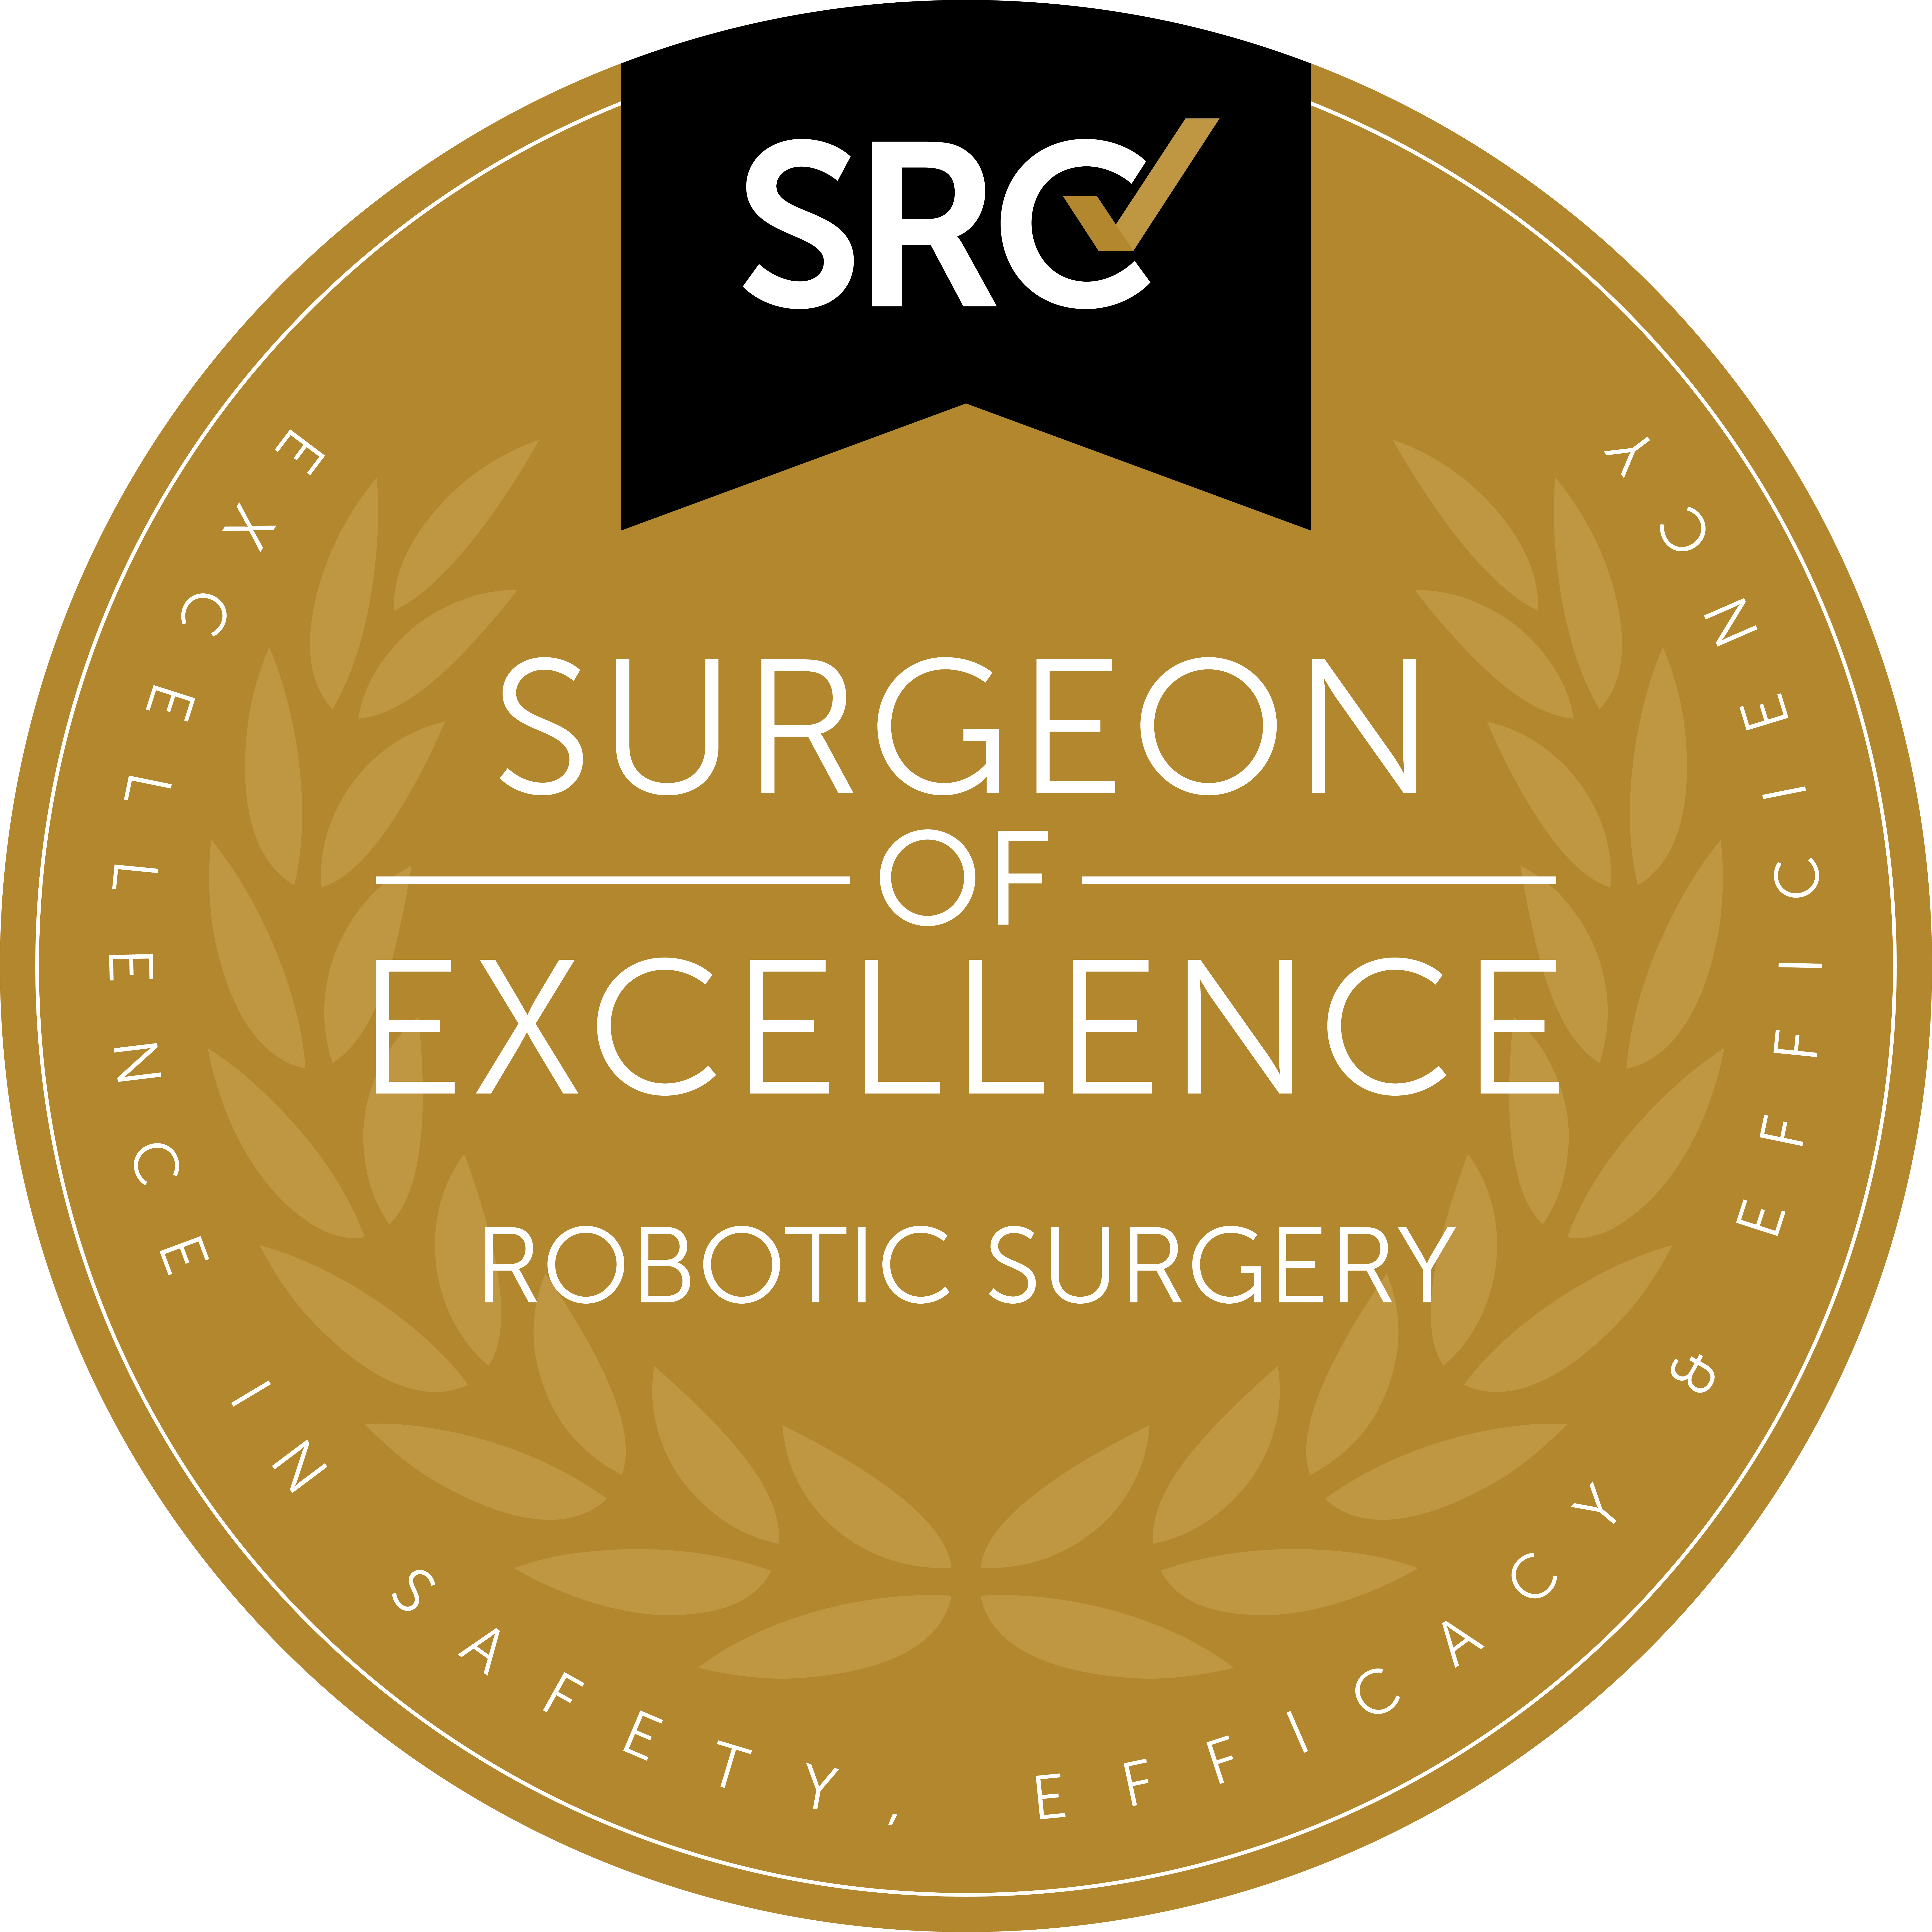 Illustrated badge for Surgeon of Excellence in robotic surgery.